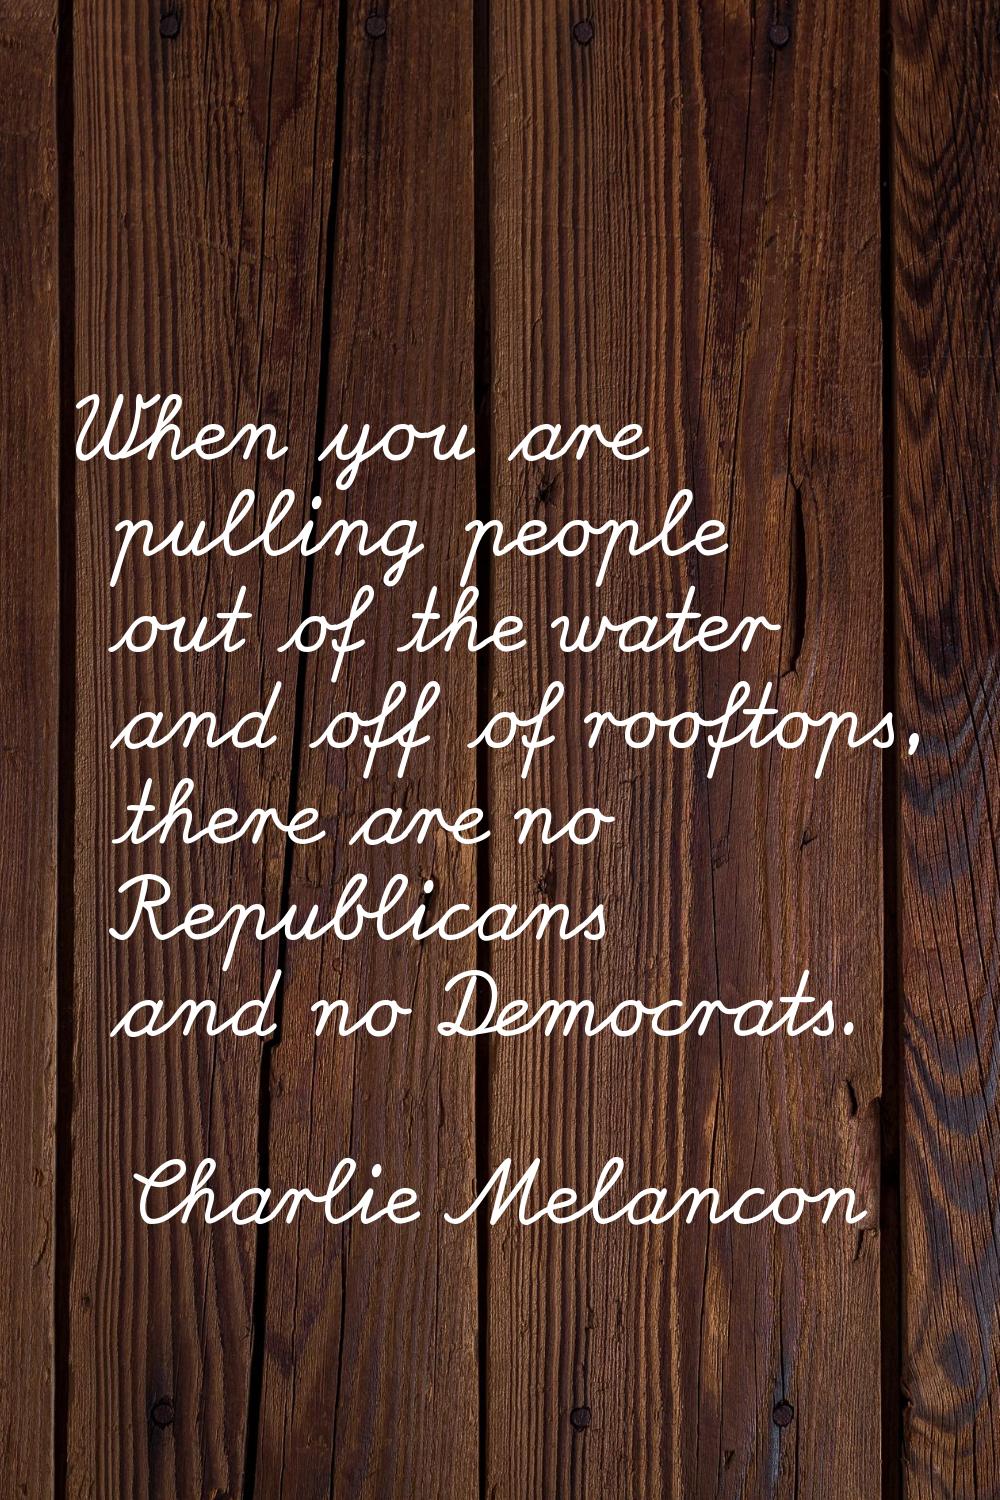 When you are pulling people out of the water and off of rooftops, there are no Republicans and no D